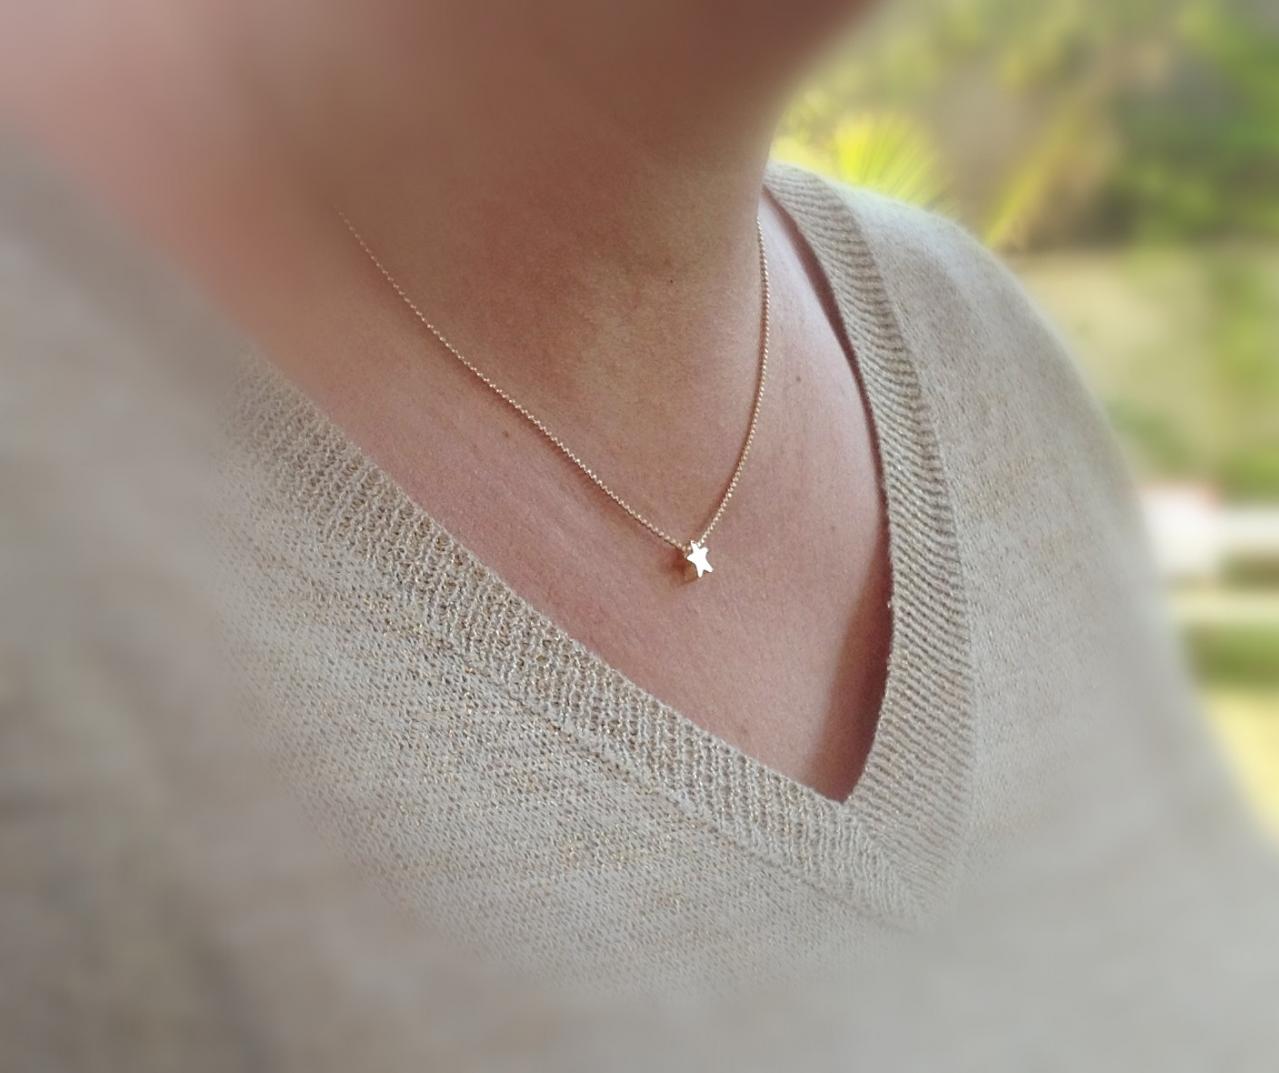 Tiny Gold Necklace, Star Necklace, Small Gold Necklace, Gold Necklace, Petite Jewelry, Delicate Necklace -577